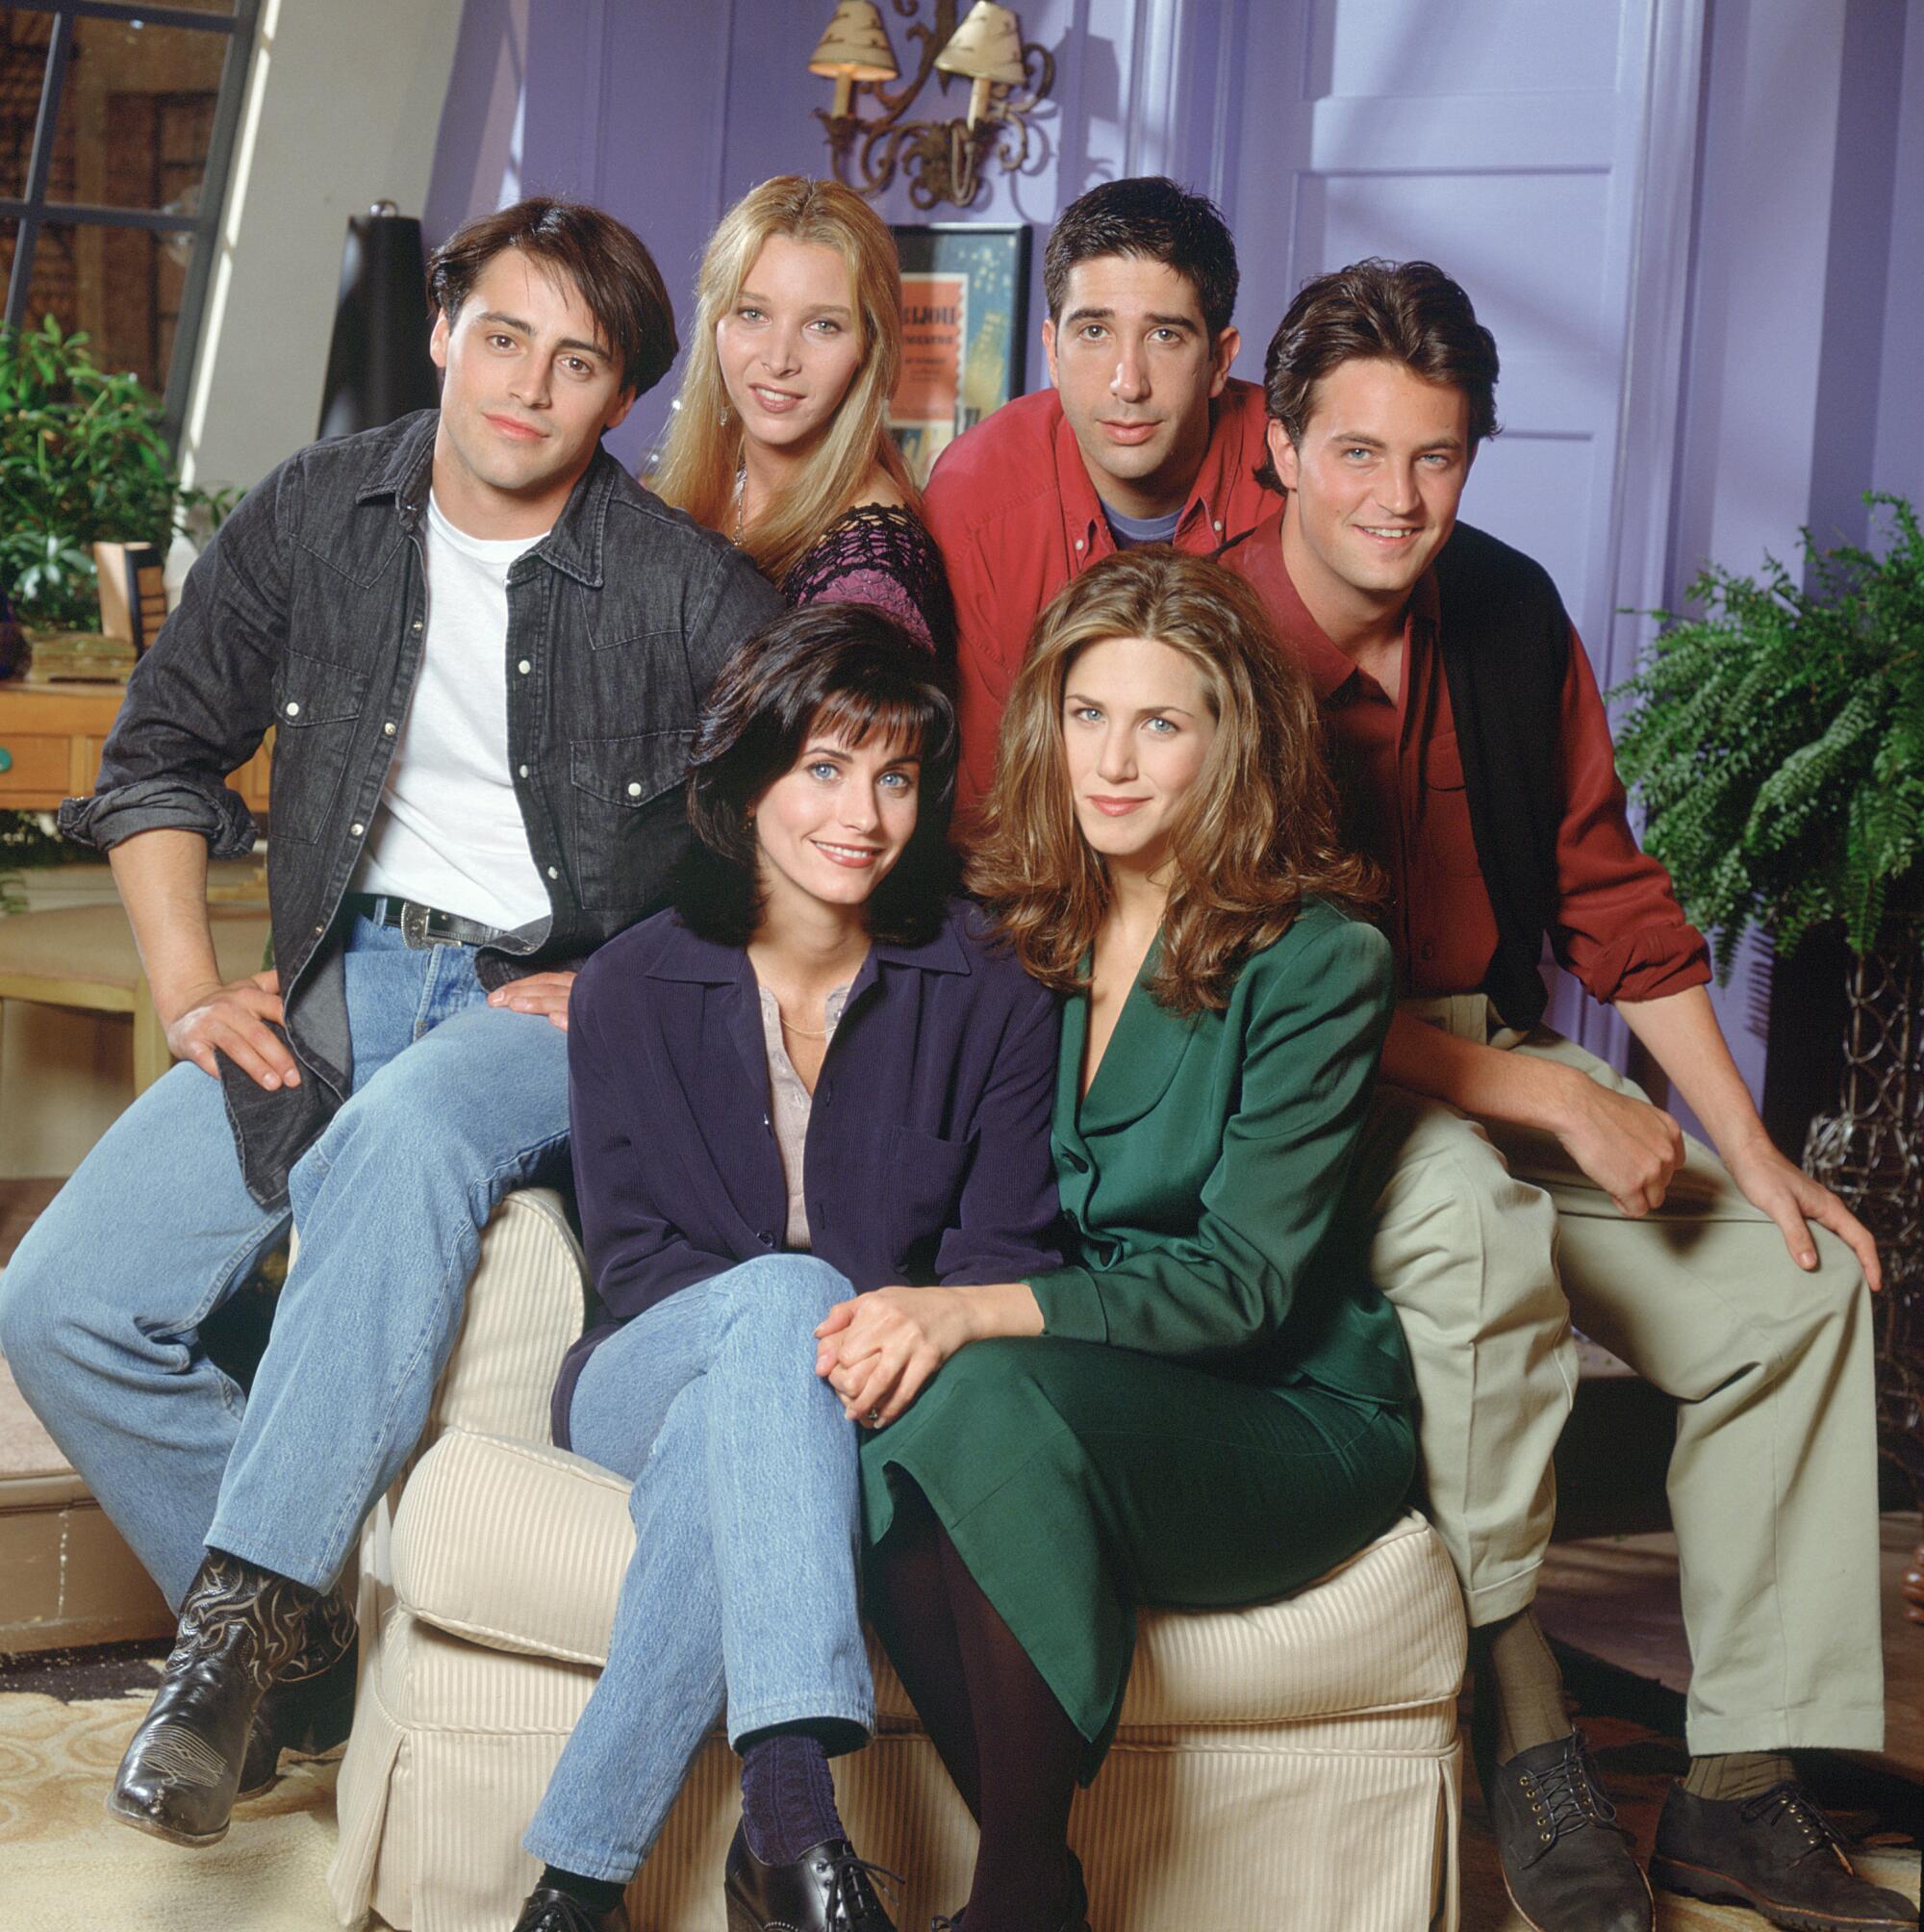 The stars of "Friends" seated in Monica's living room in Season 1.